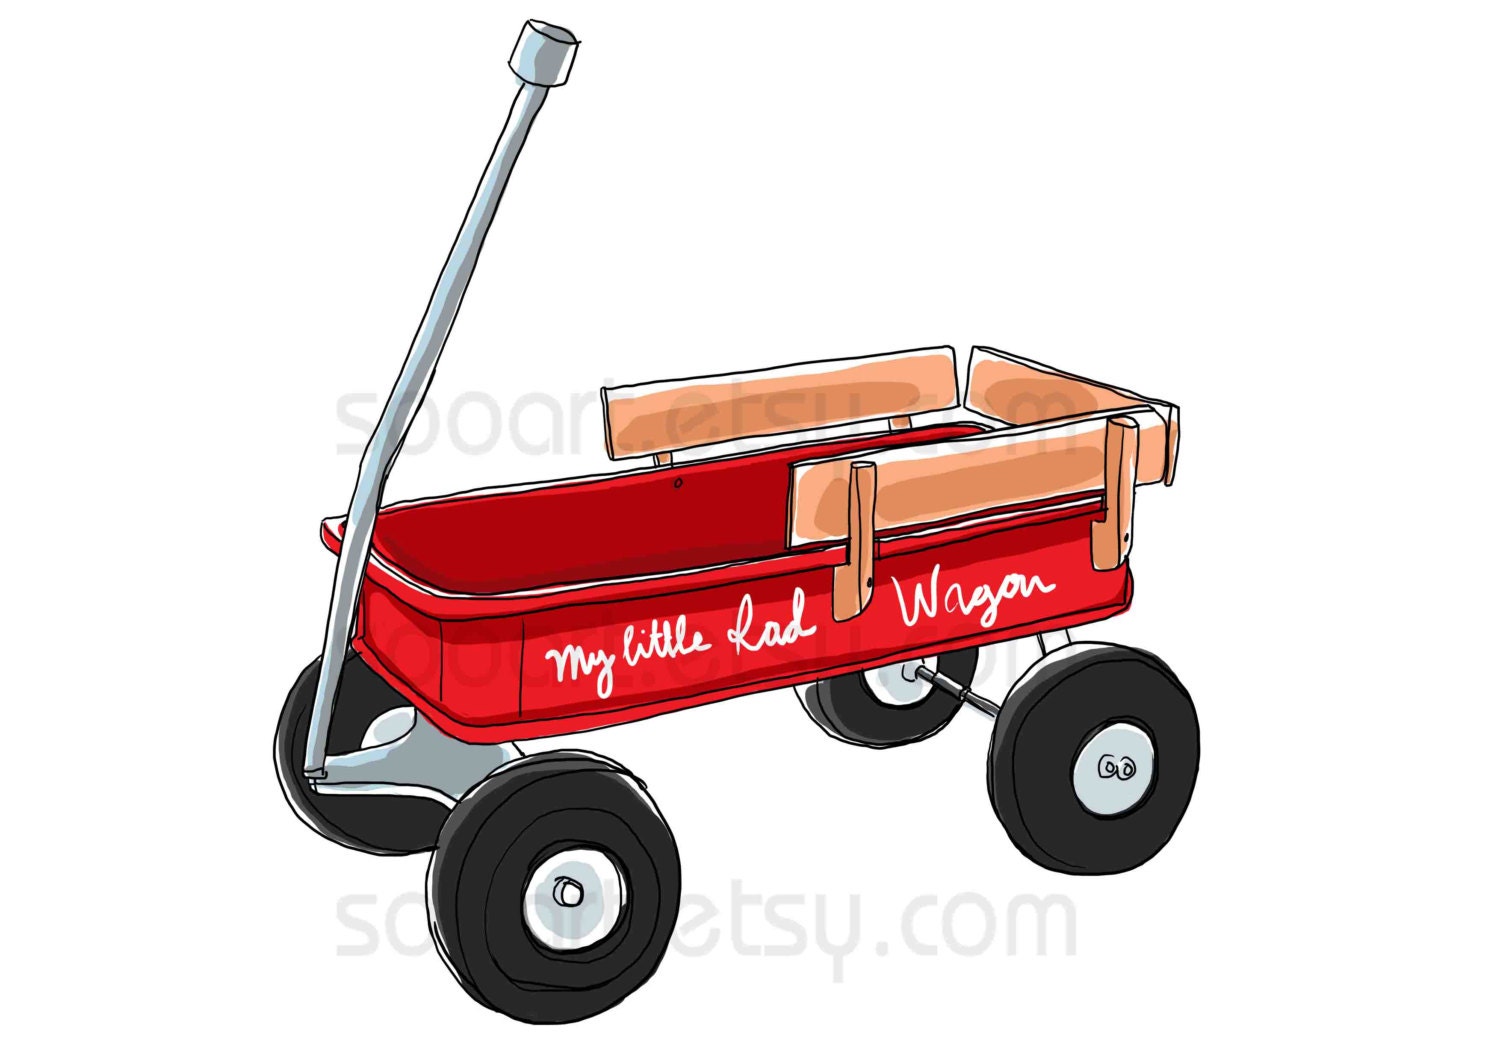 Vintage Toy Wagons 58